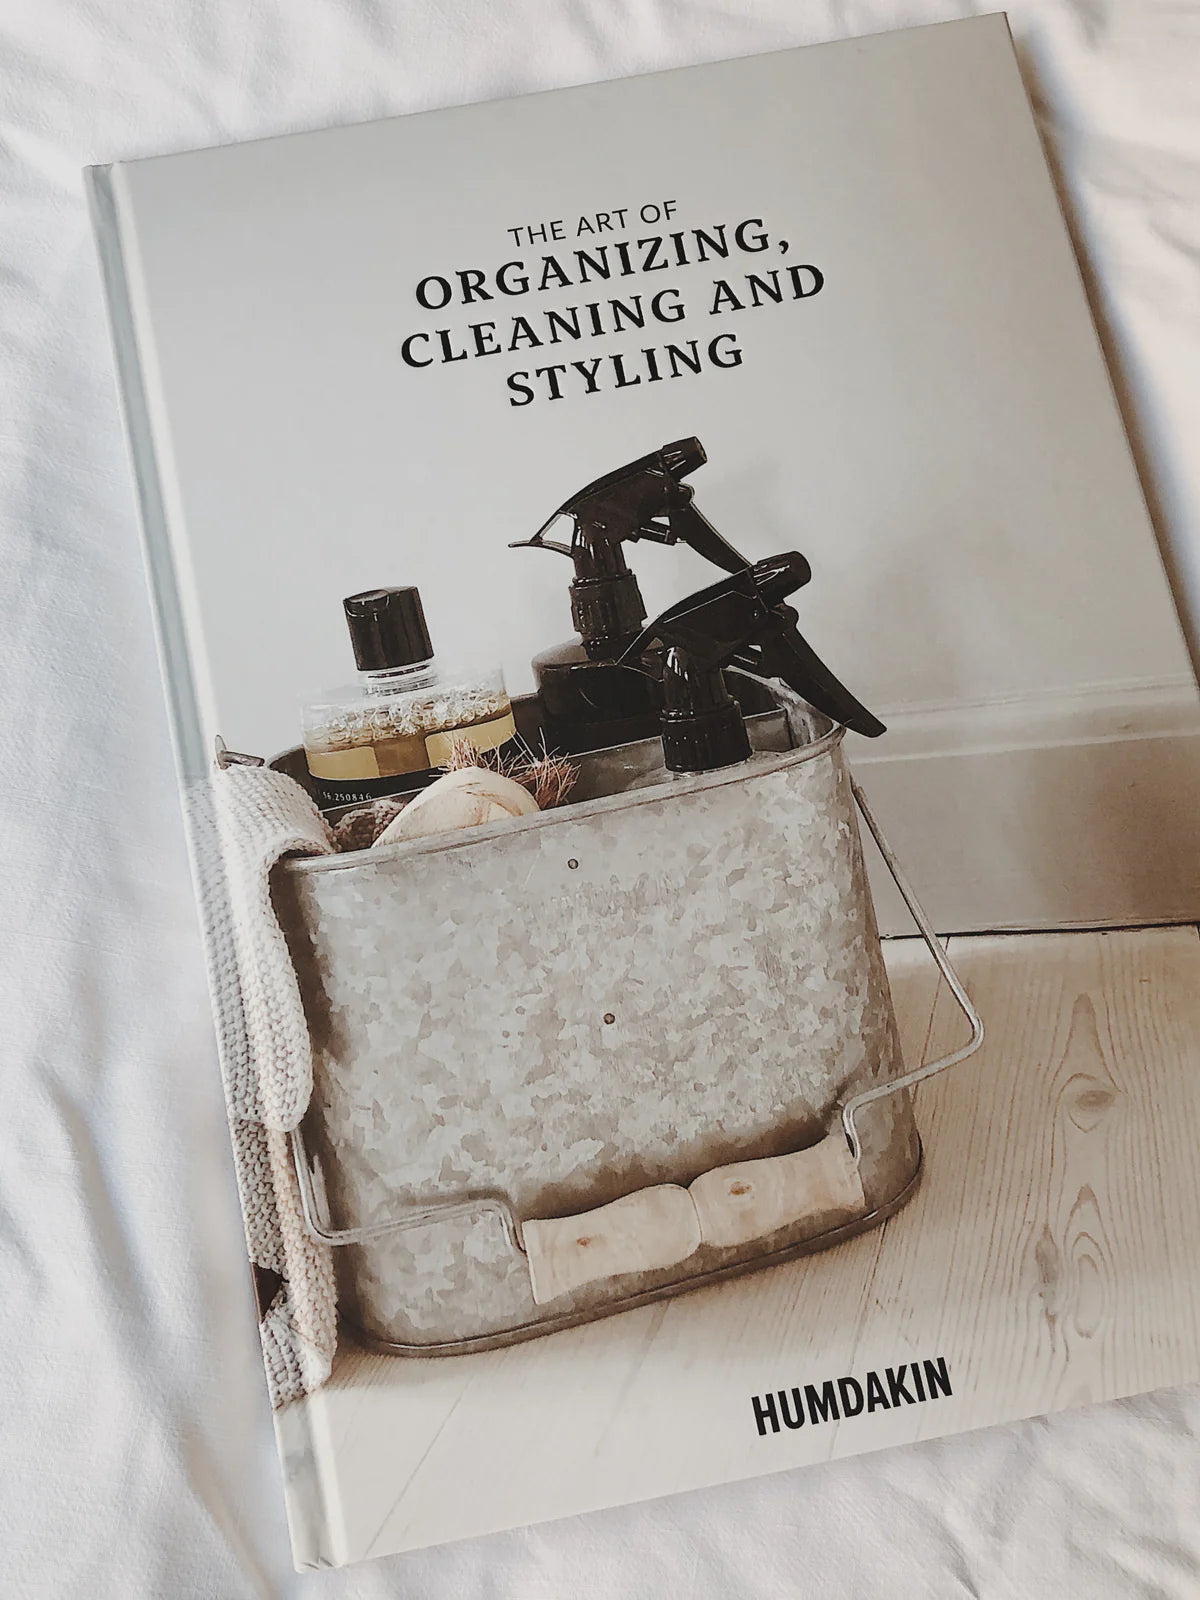 The art of organizing cleaning and styling